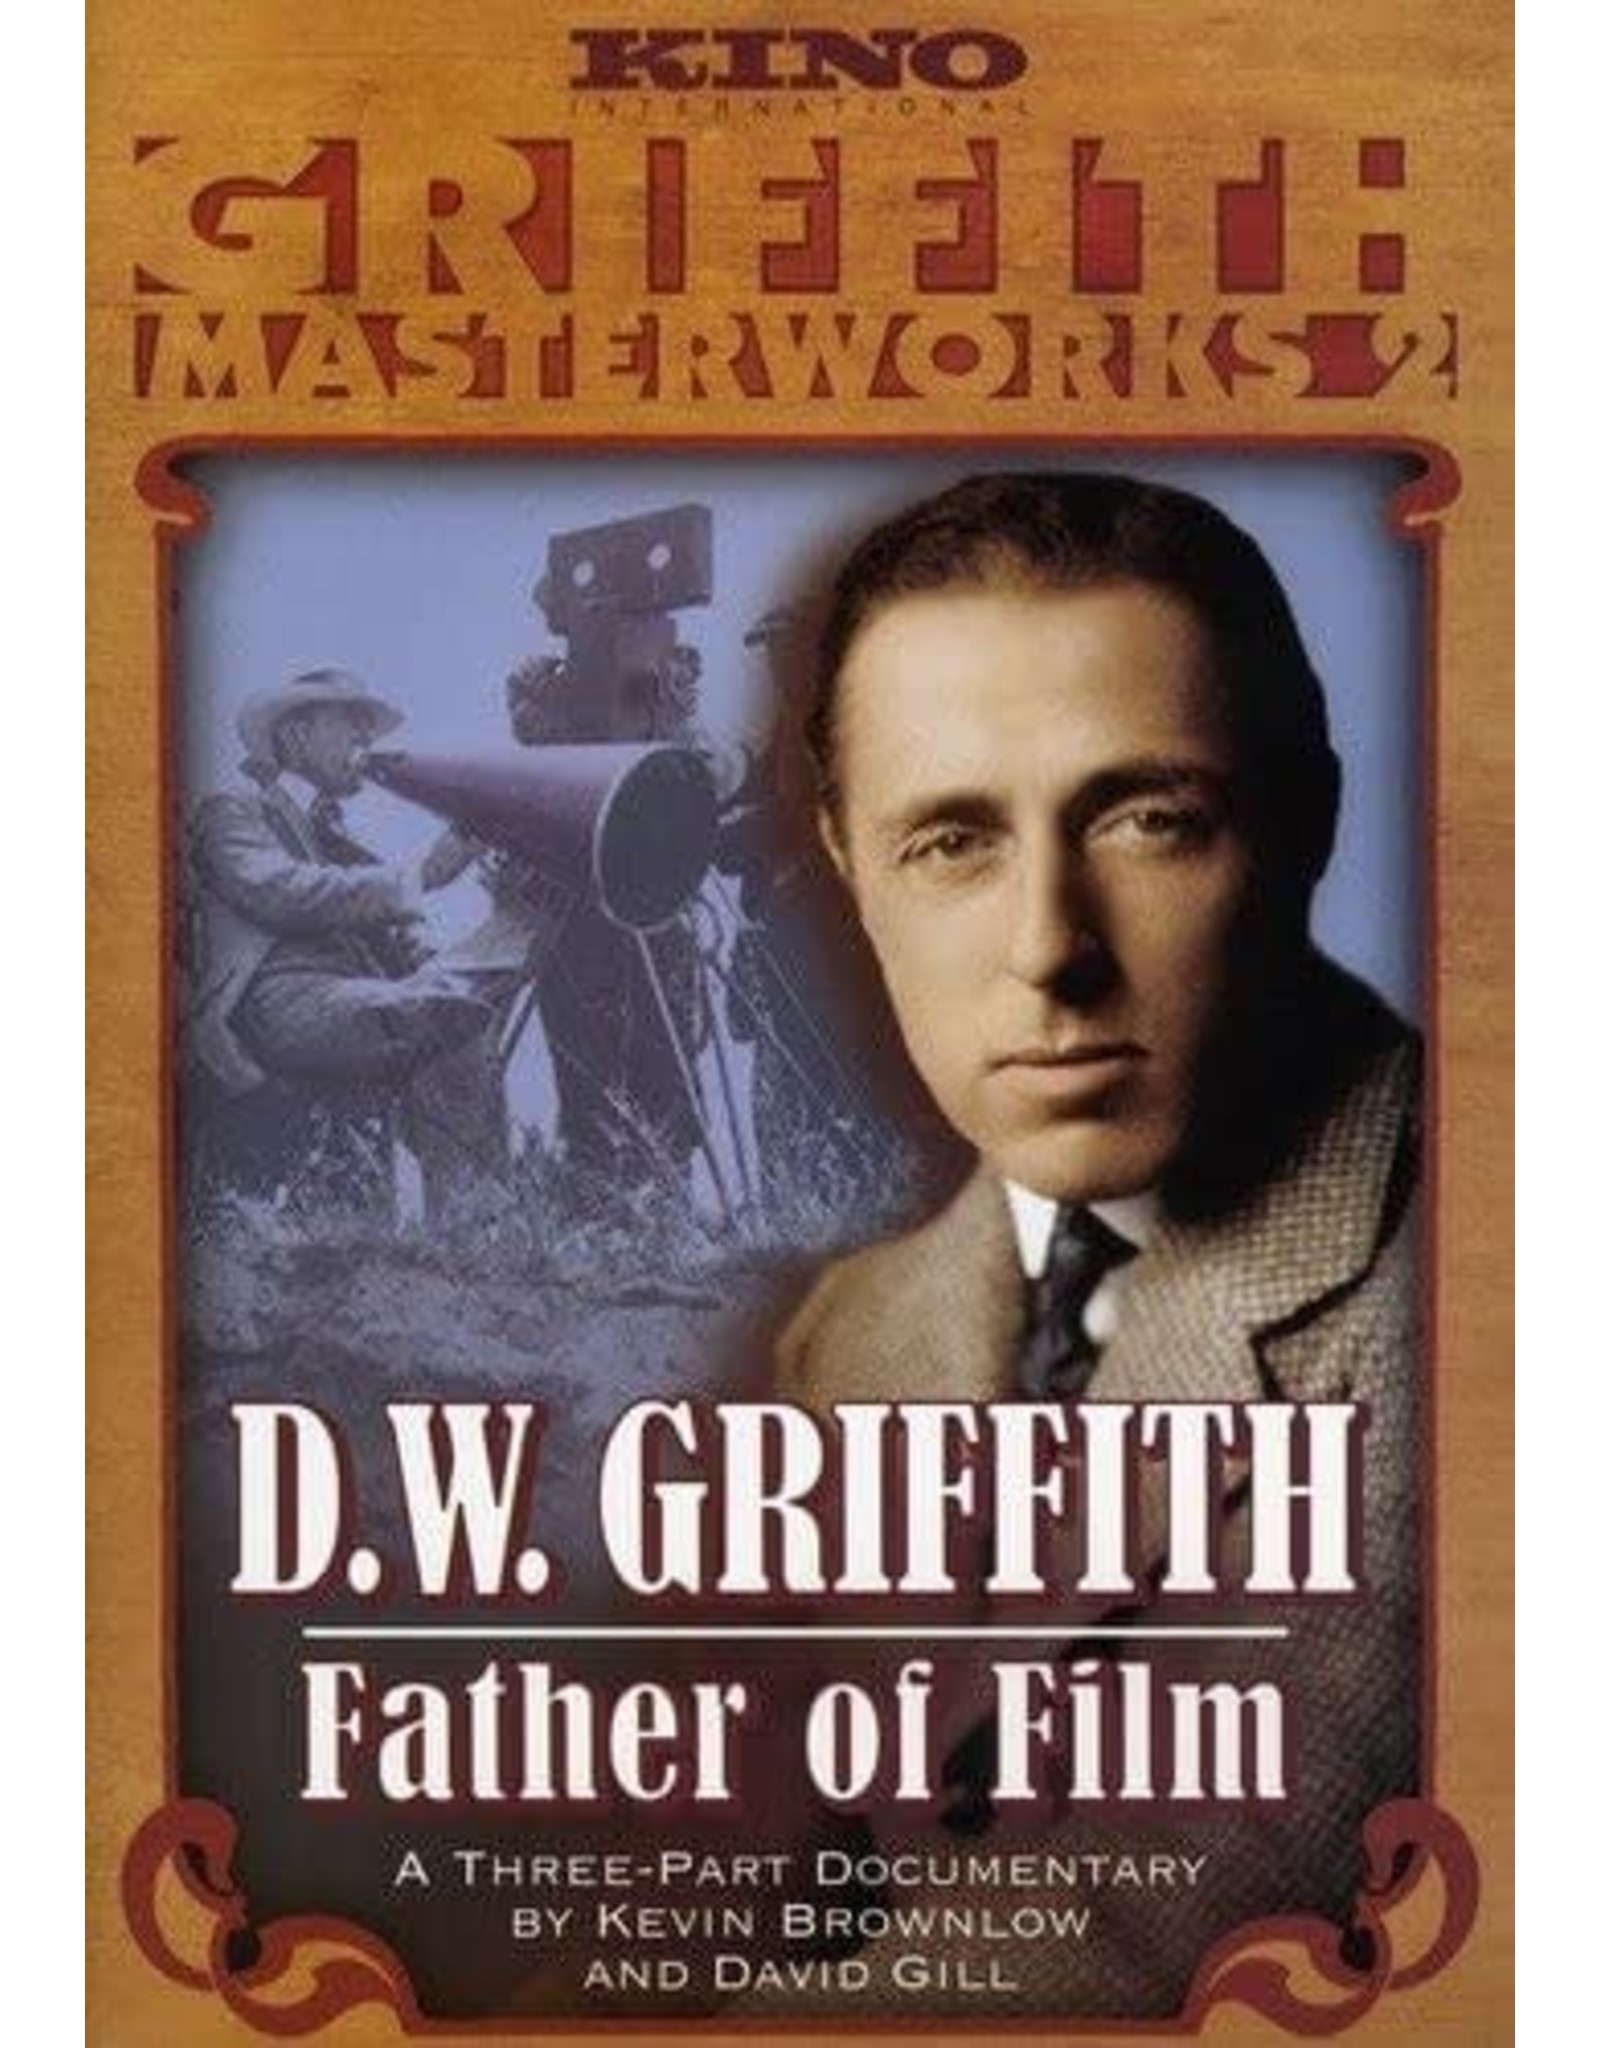 Cult & Cool D.W. Griffith Father of Film - Kino International (Used)